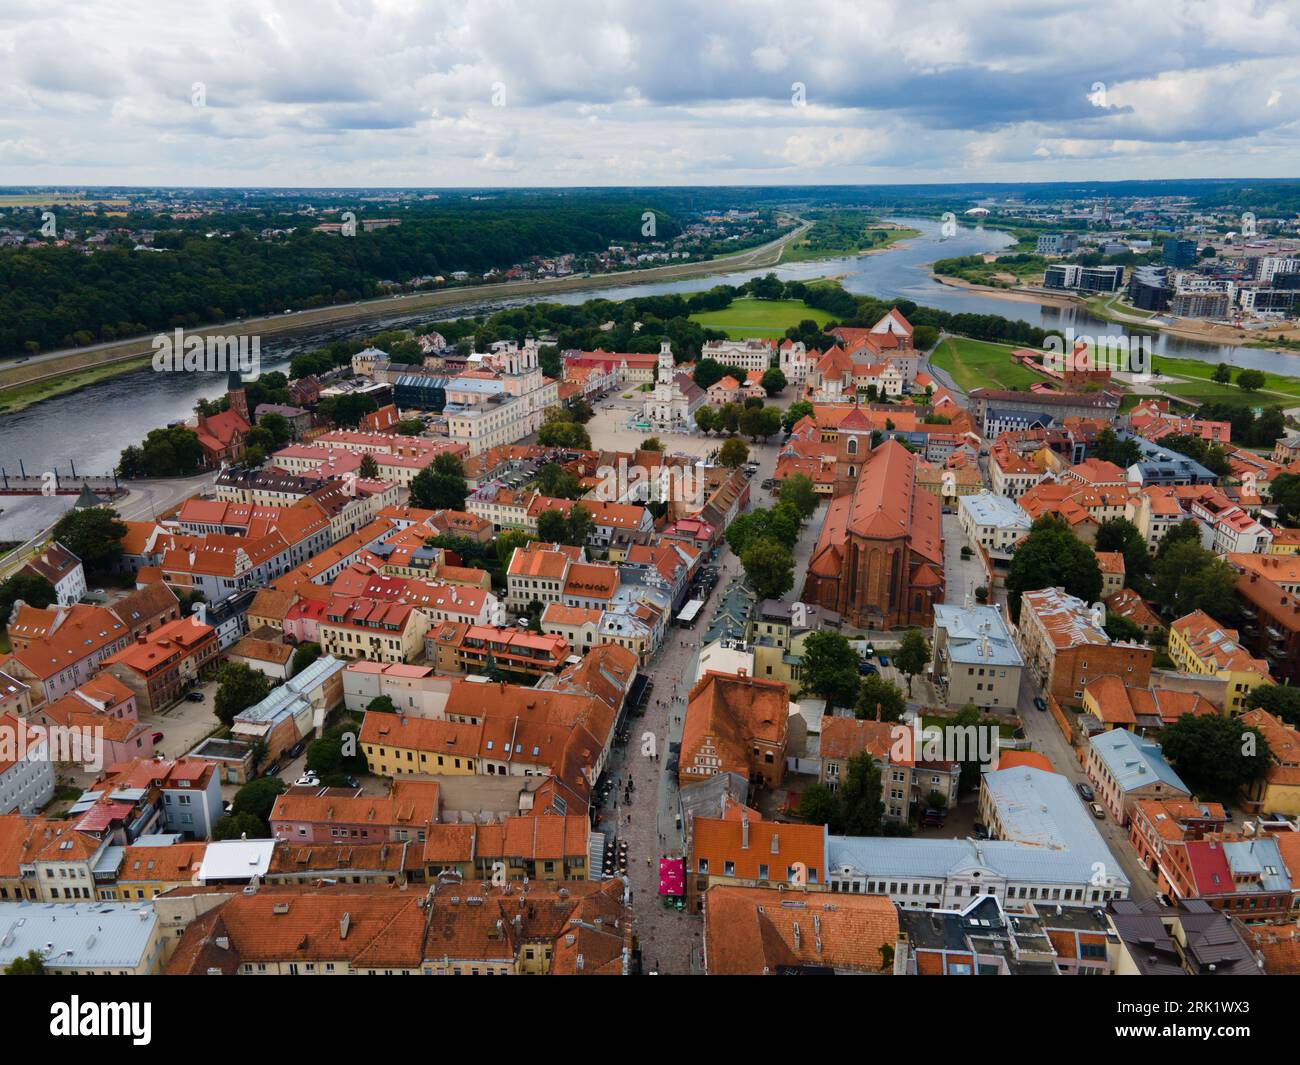 An aerial view of the picturesque riverside town of Kaunas, Lithuania Stock Photo